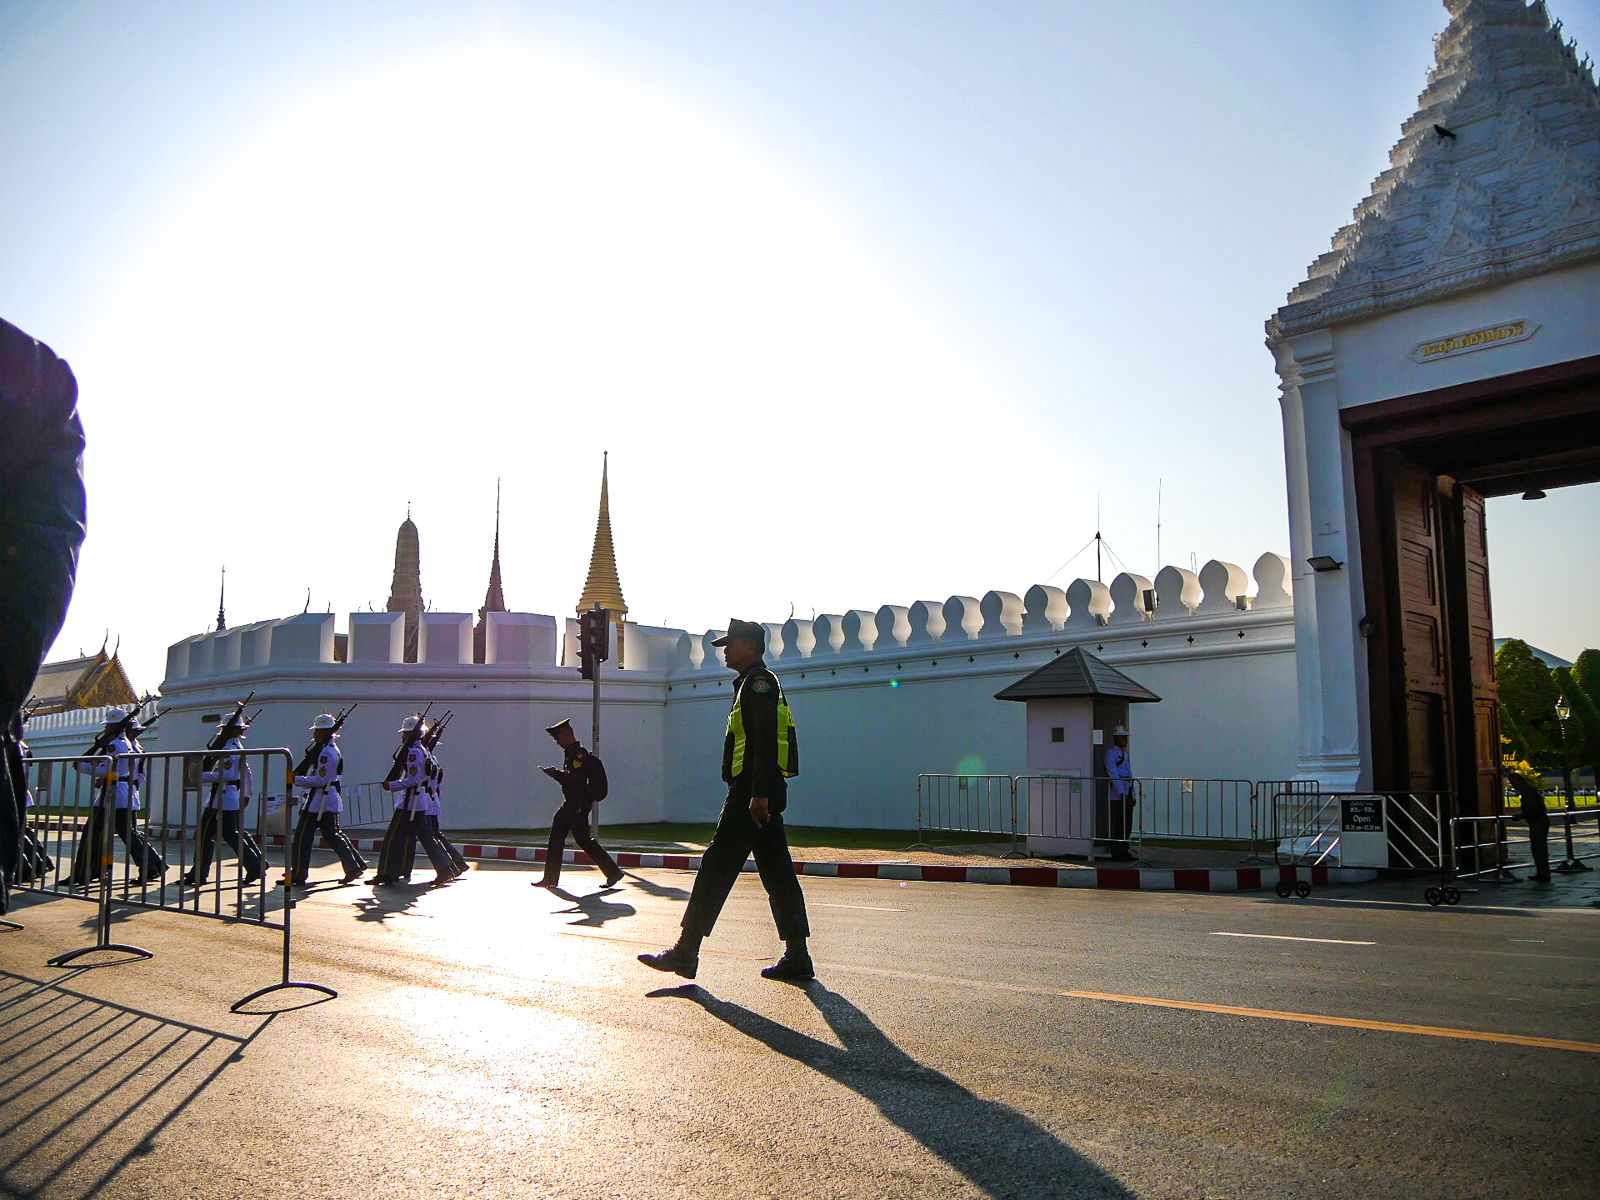 Guards marching outside the Grand Palace before it opens at 8:30 a.m.